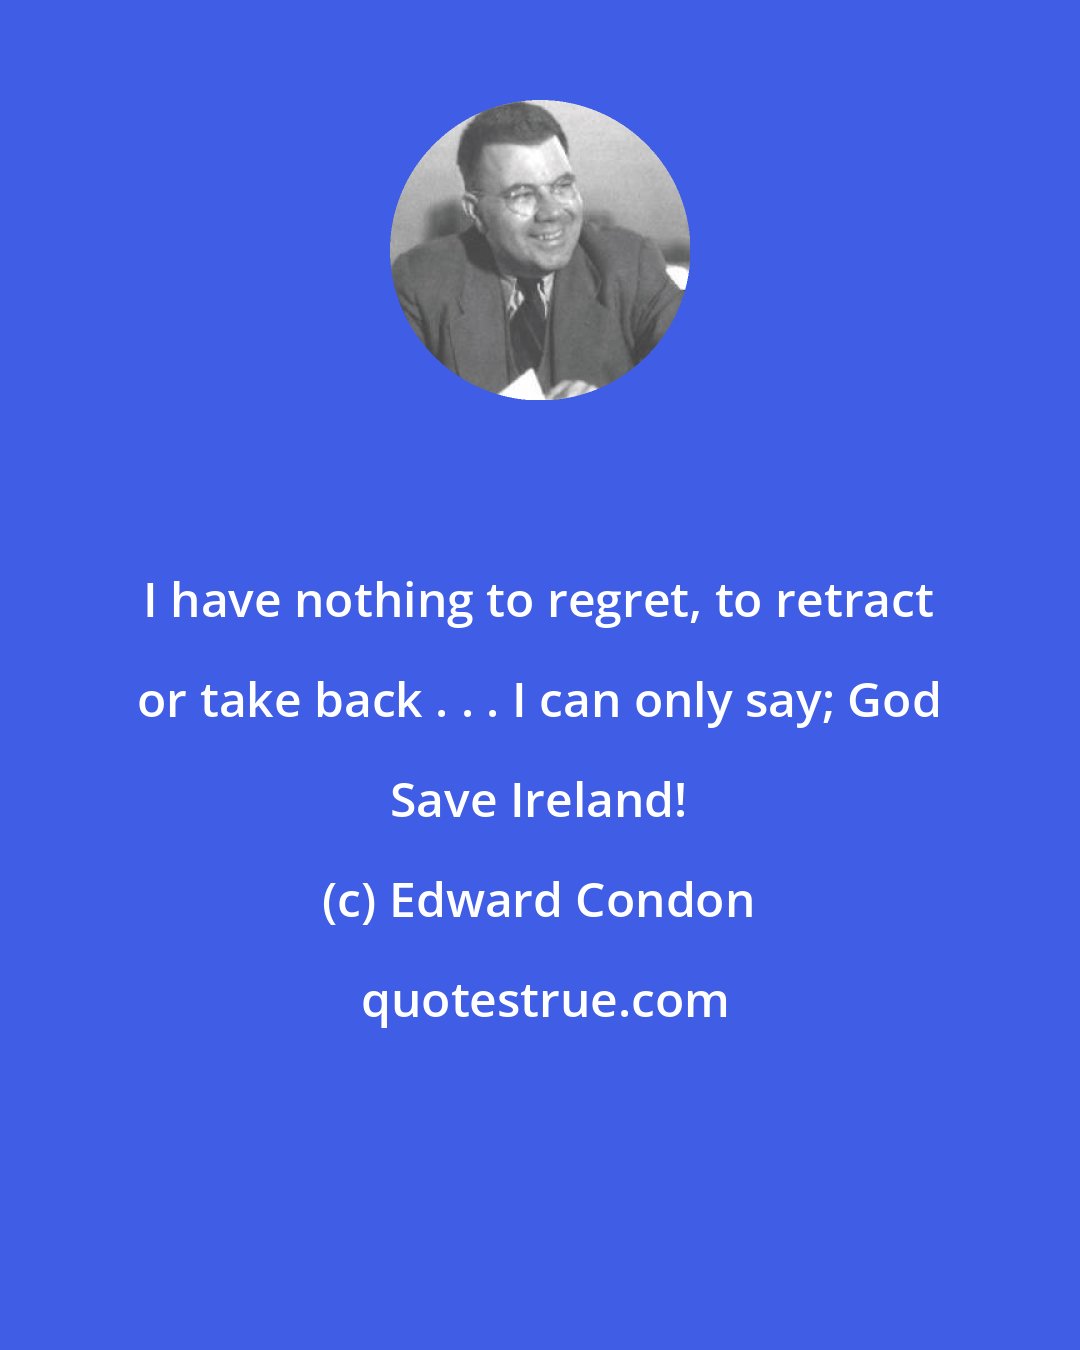 Edward Condon: I have nothing to regret, to retract or take back . . . I can only say; God Save Ireland!